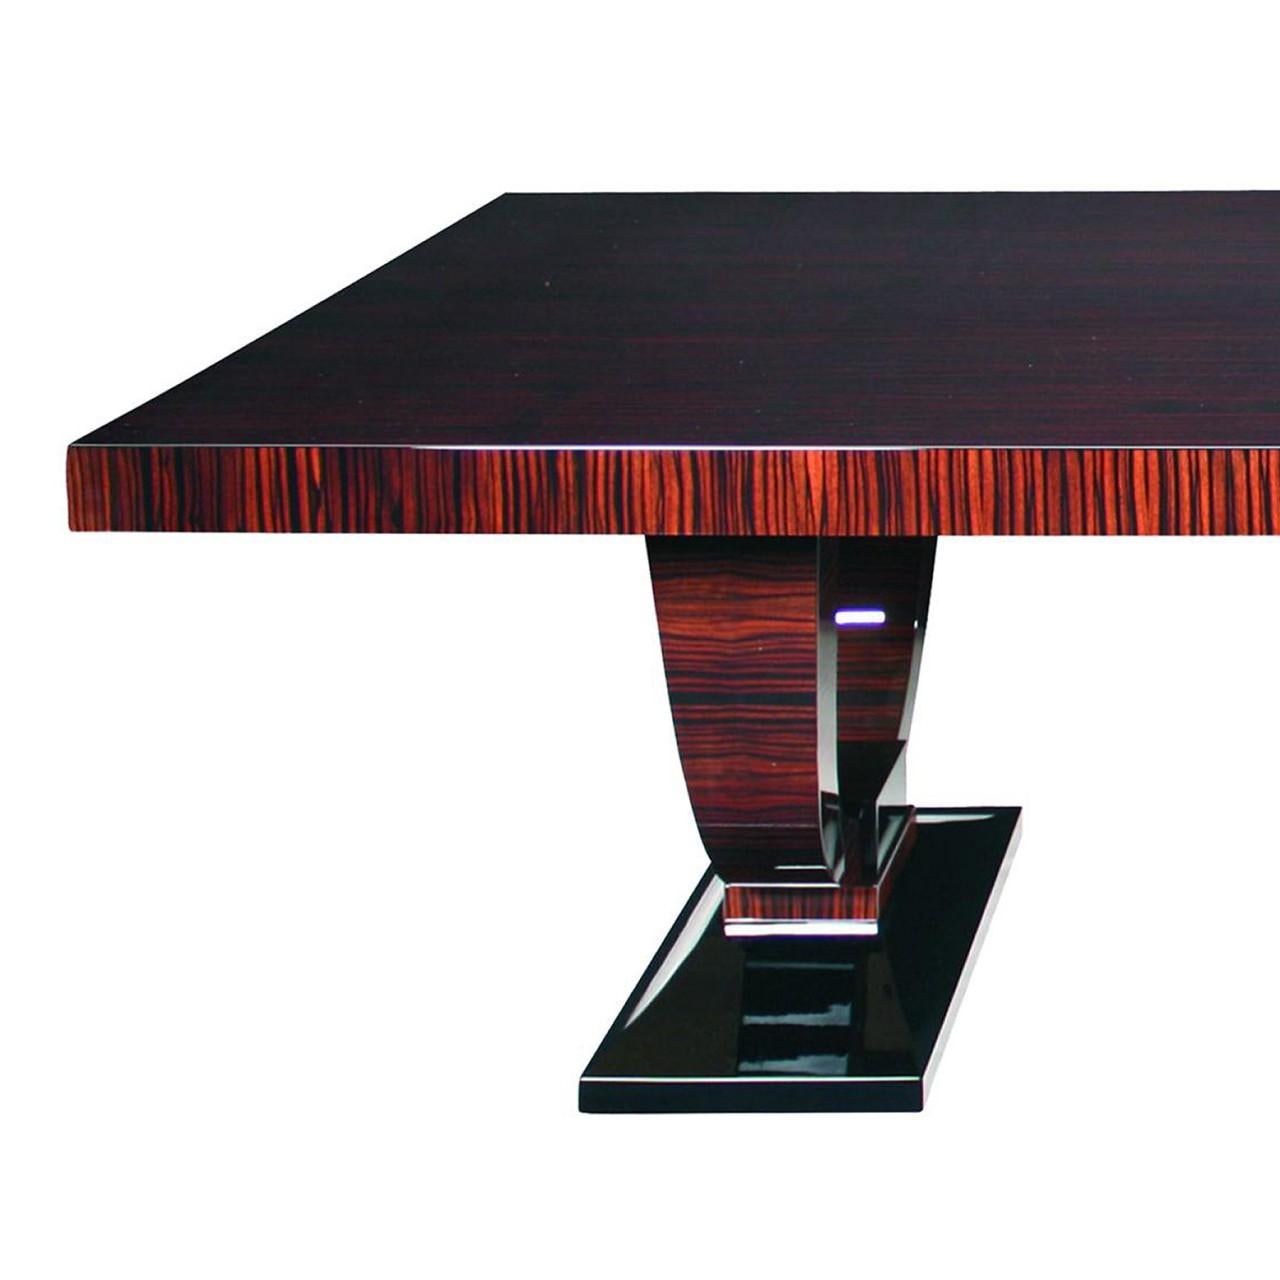 Grande Art Deco table in Macassar ebony with black high gloss accent details on the quintessential Deco base, inspired by Ruhlmann design.
Available with or without the center brace. Extension leaves can be added on ends in matching veneer or black